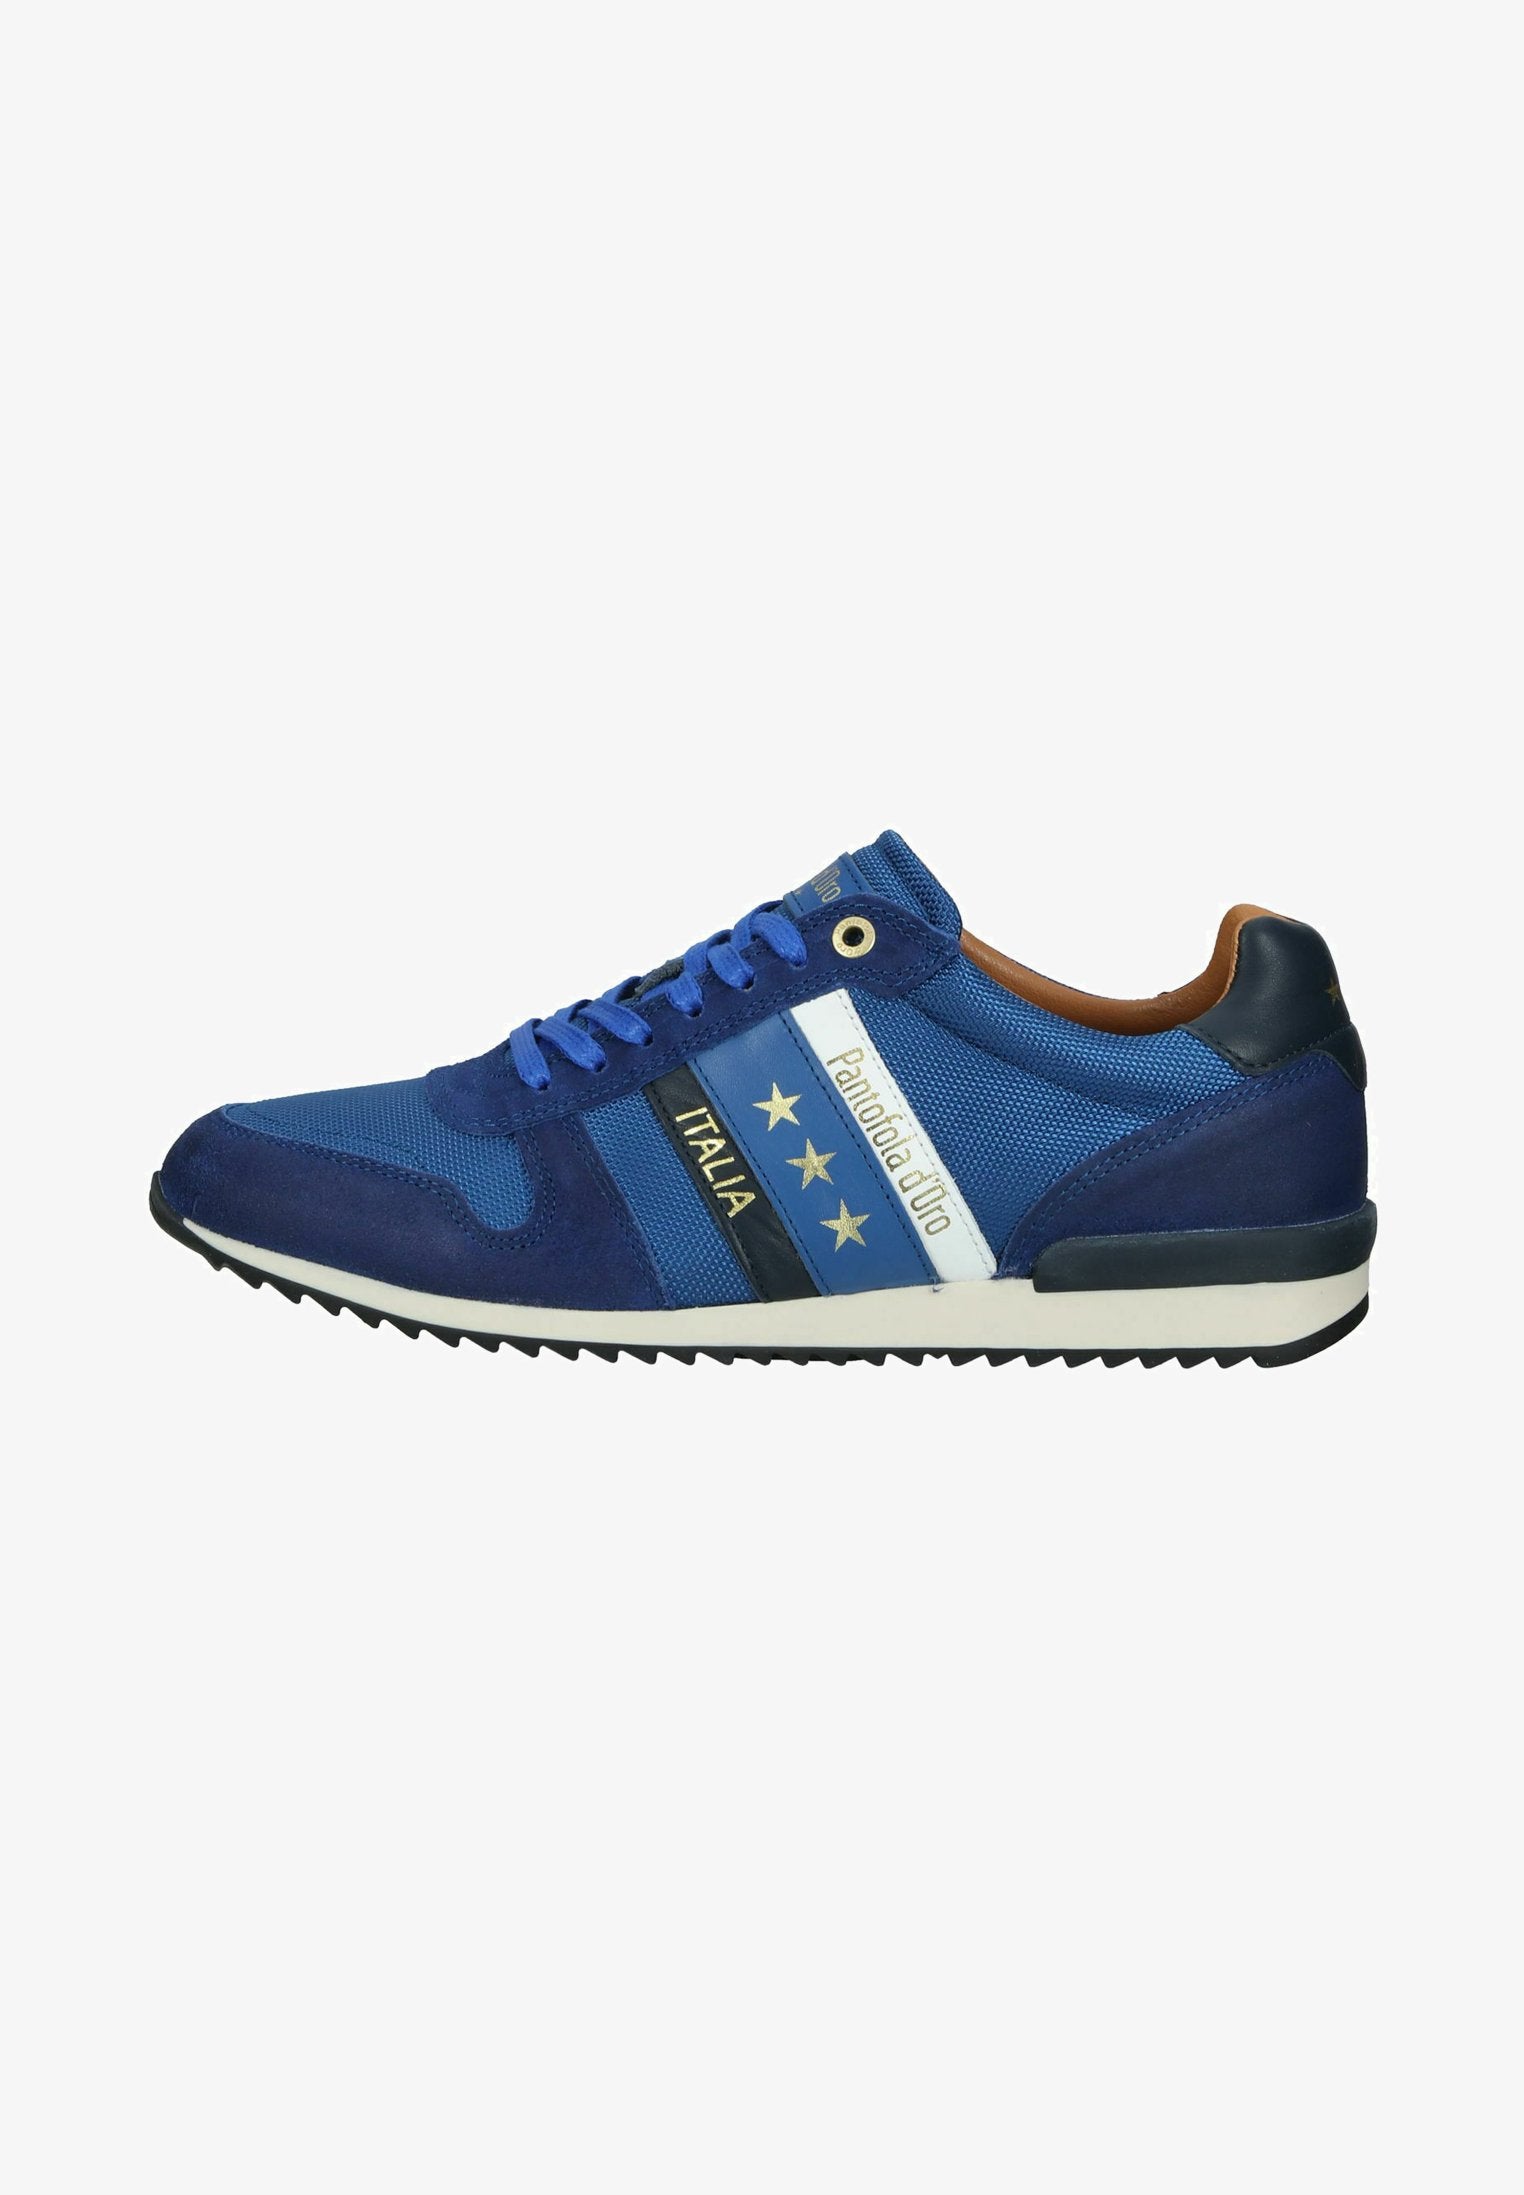 Rizza N Low in Olympian Blue Sneakers Pantofola d'Oro   